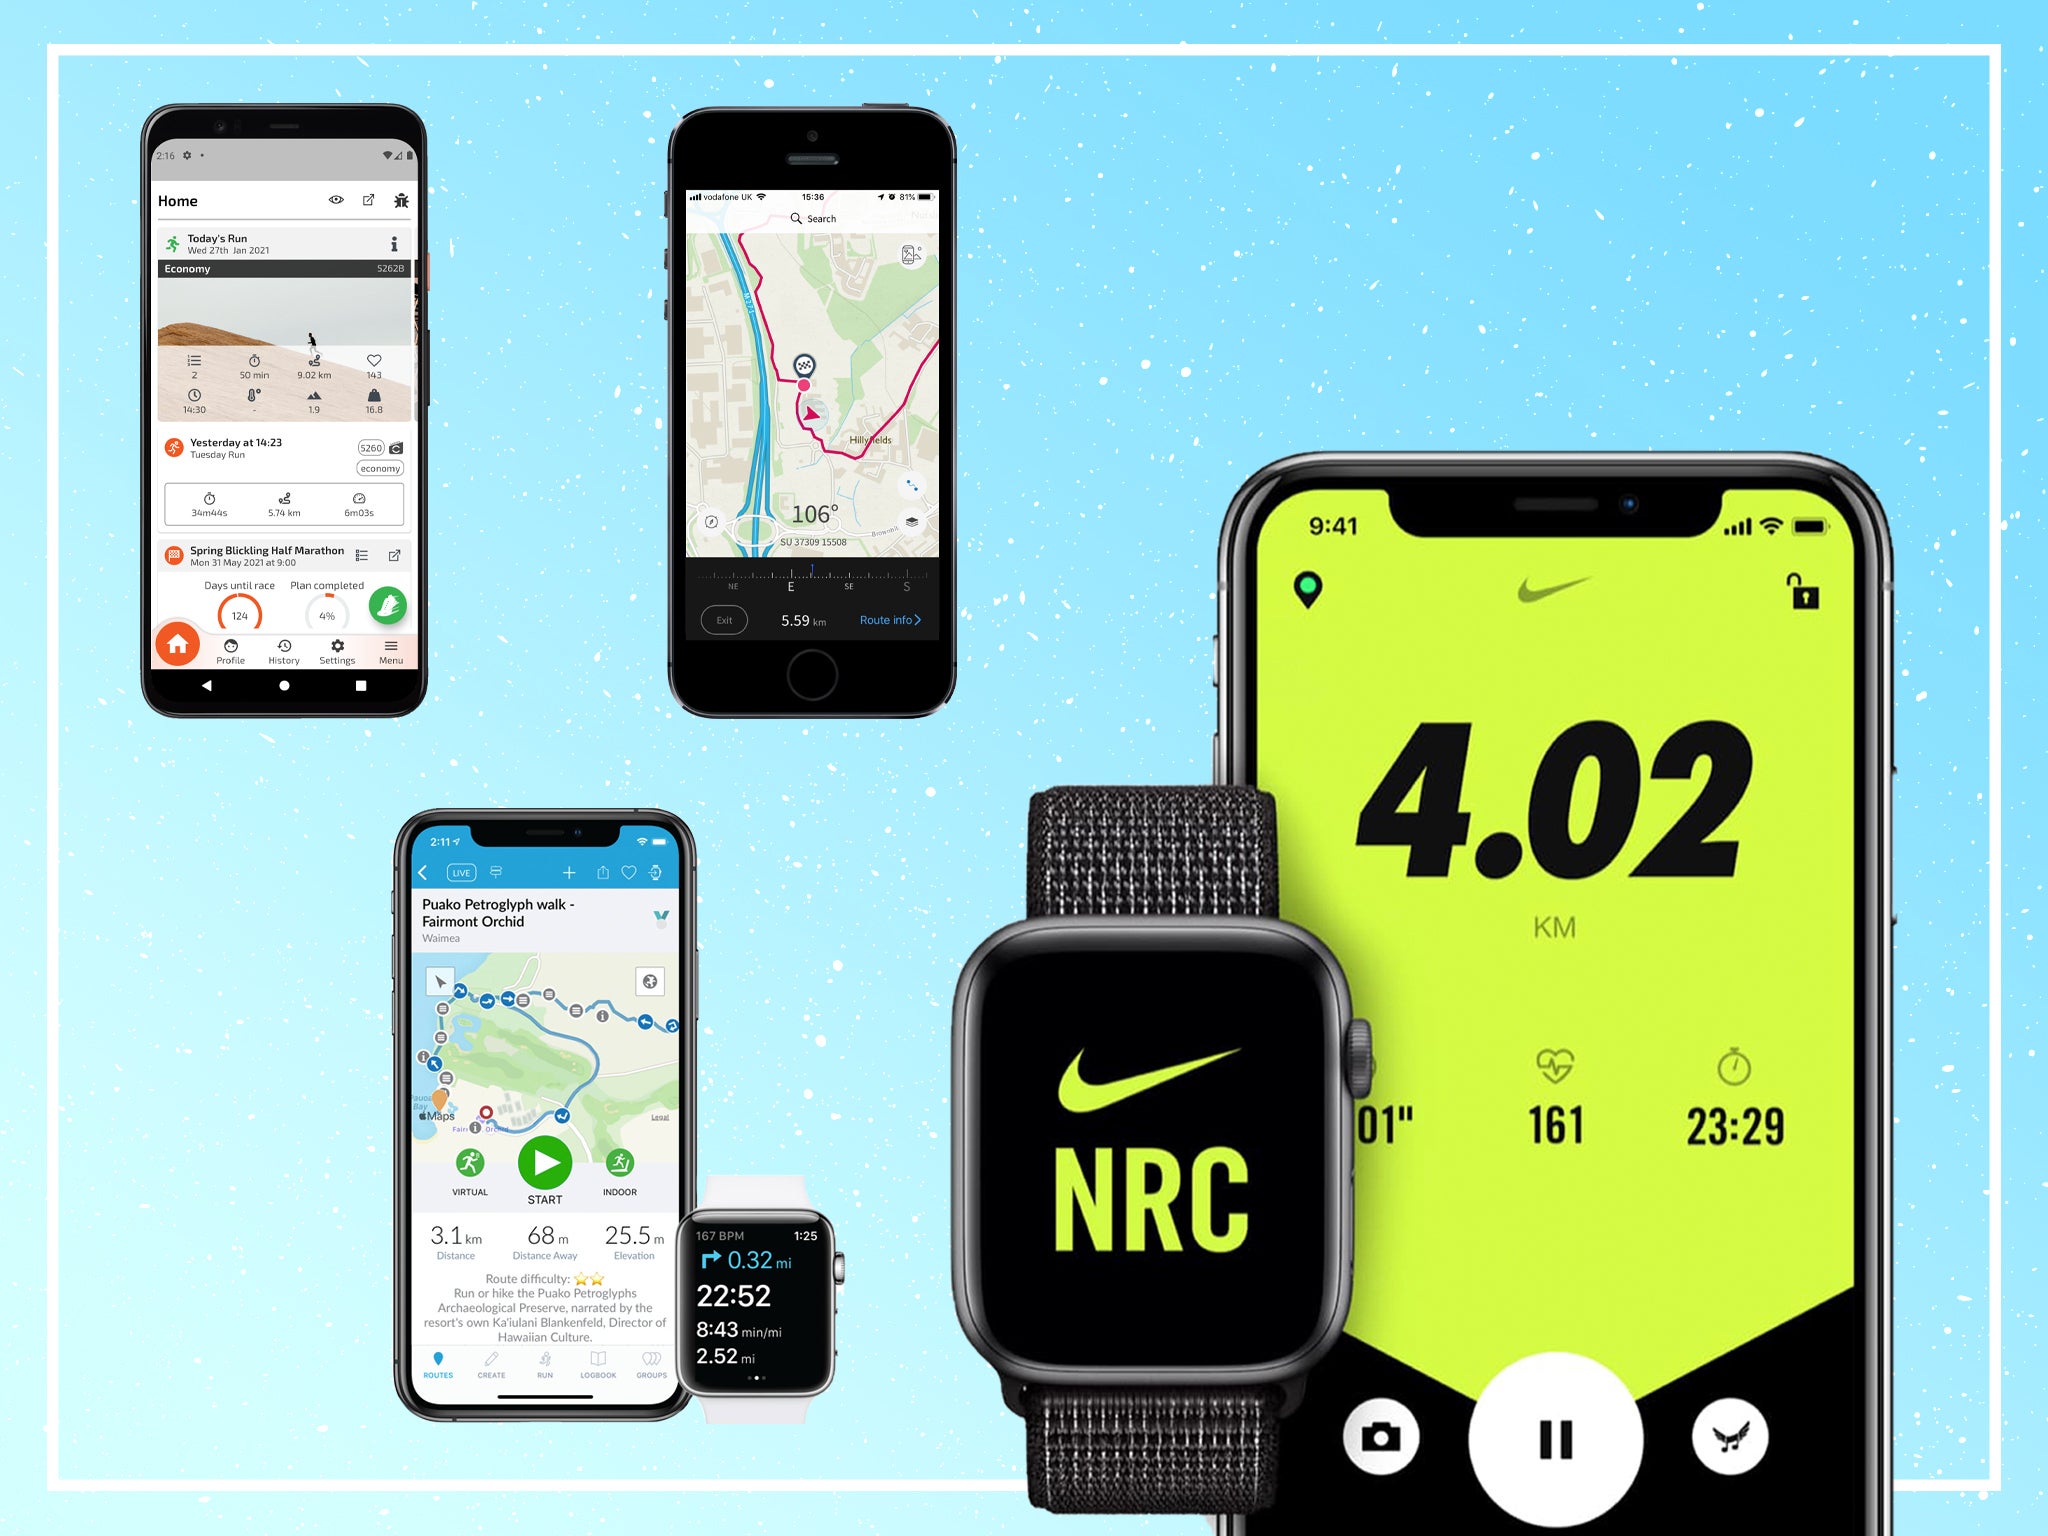 Keep track of your progress, map your routes and become a better athlete with our picks